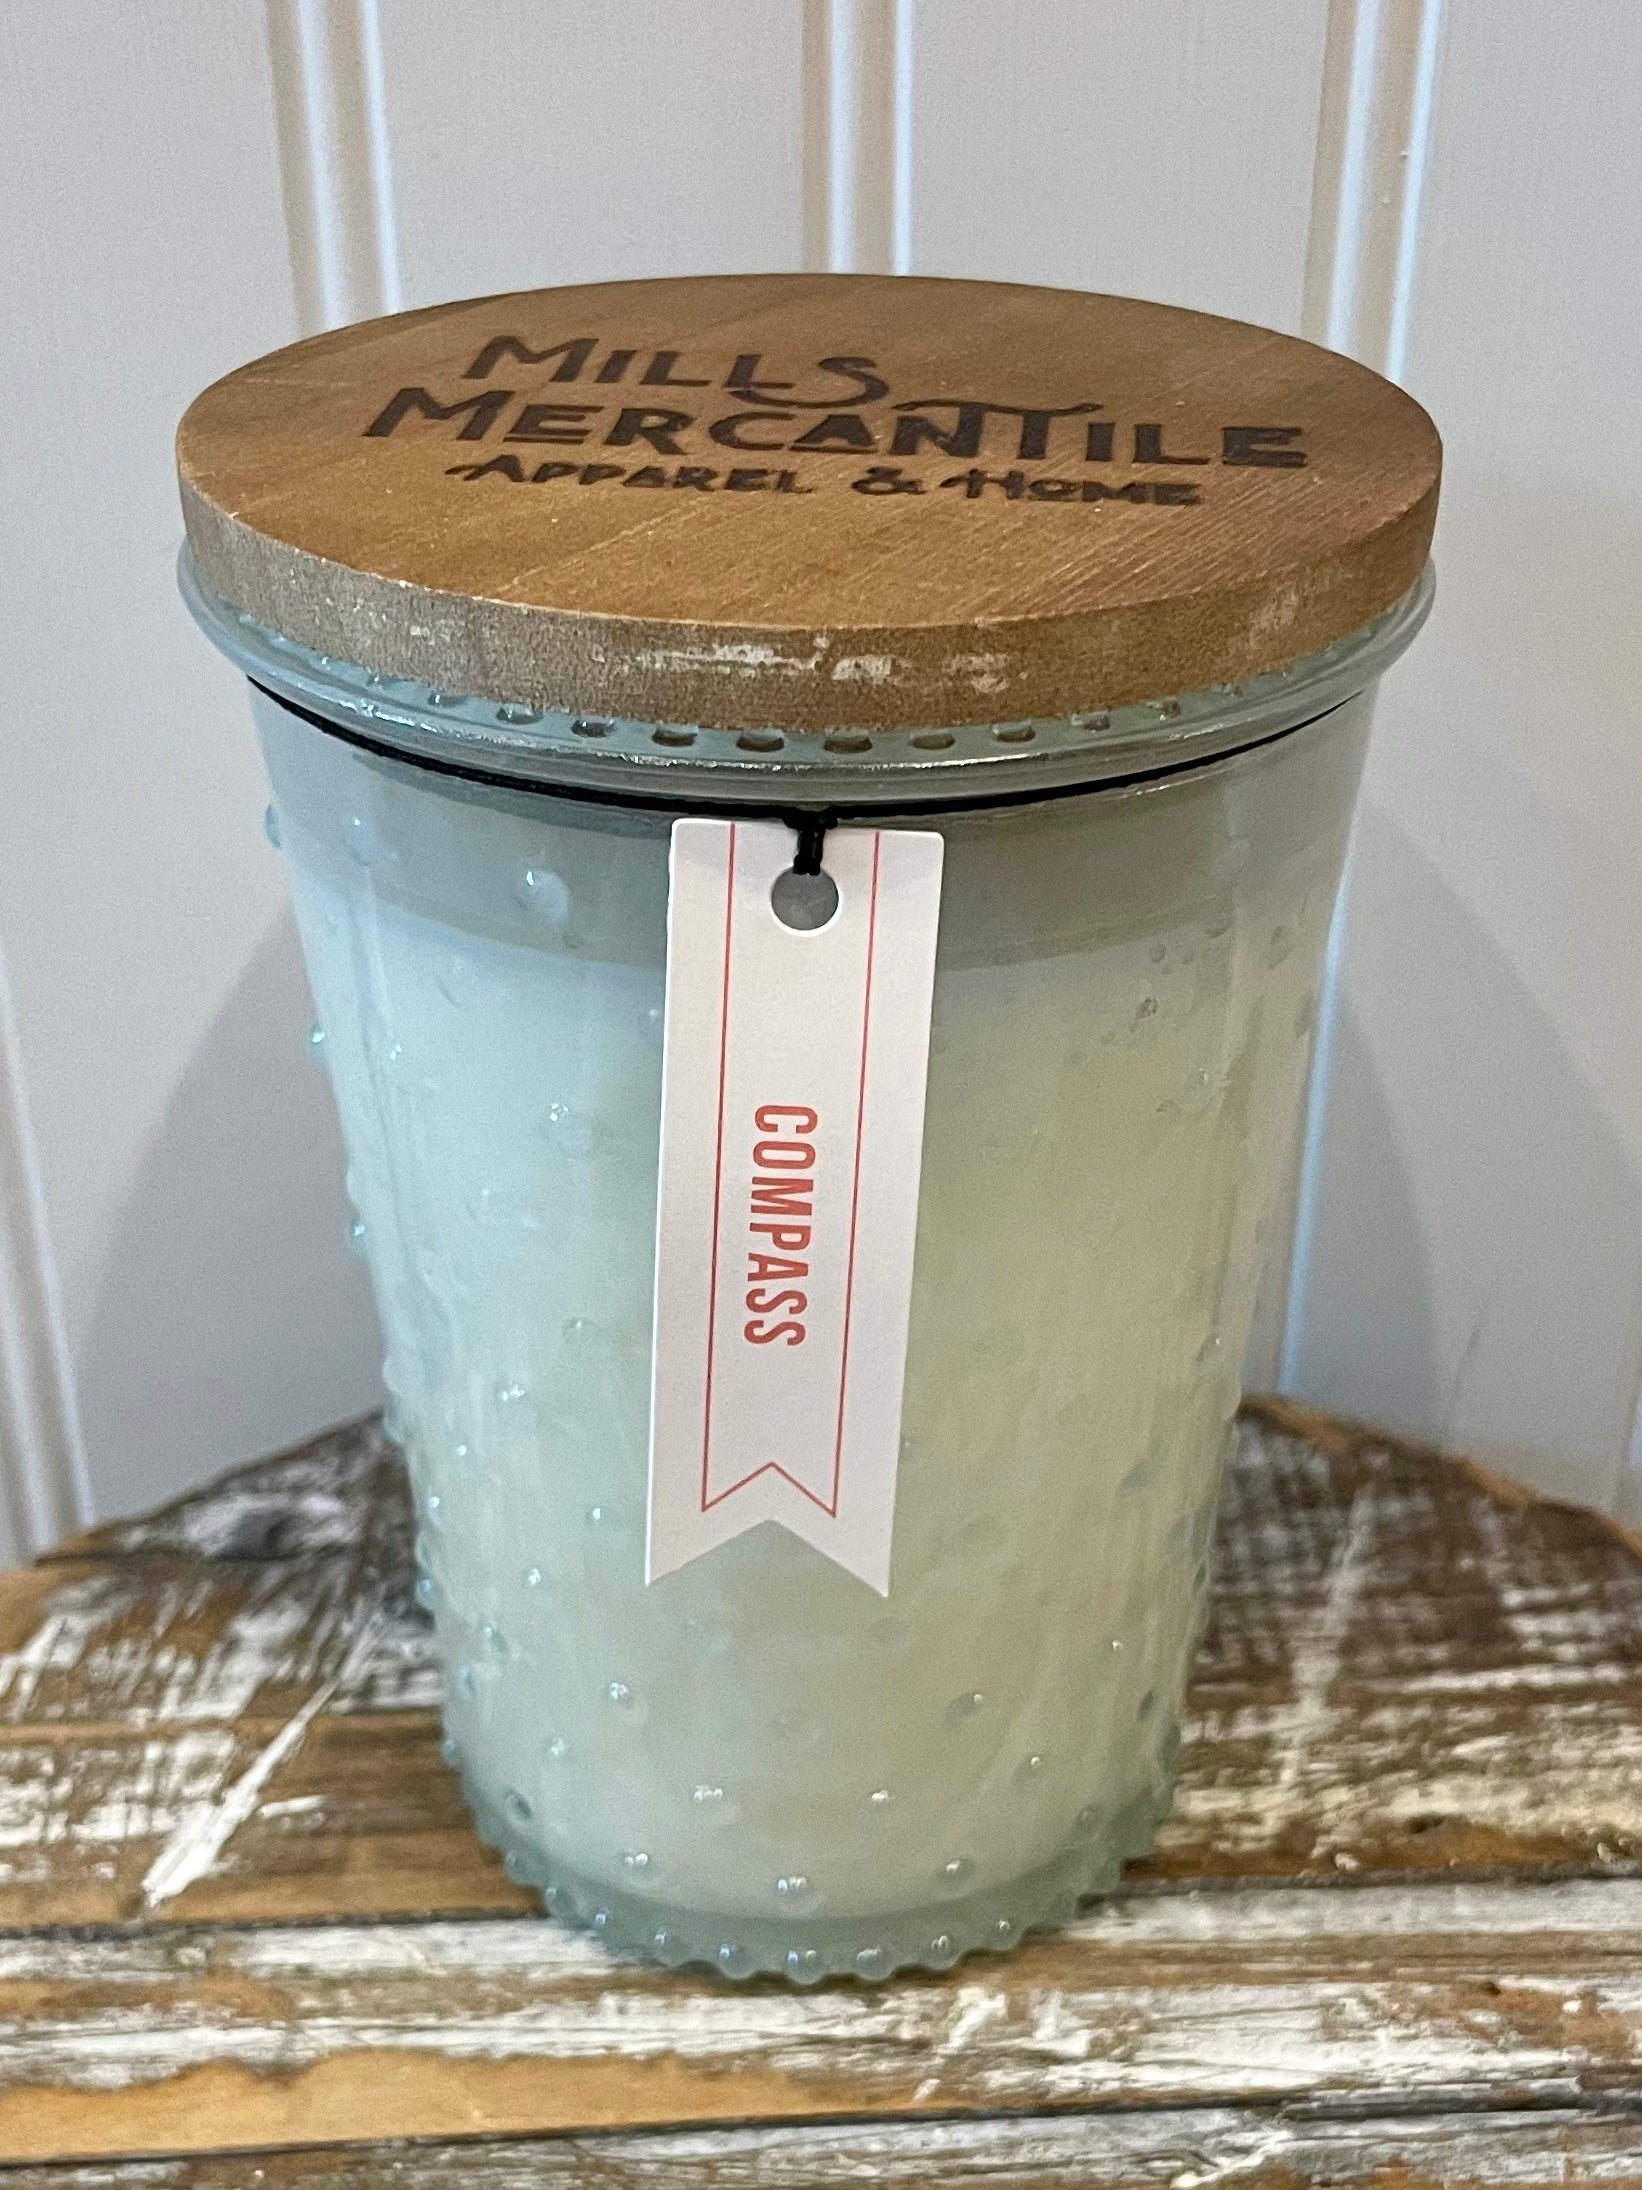 Compass Scent in Hobnail - Mills Mercantile Candle